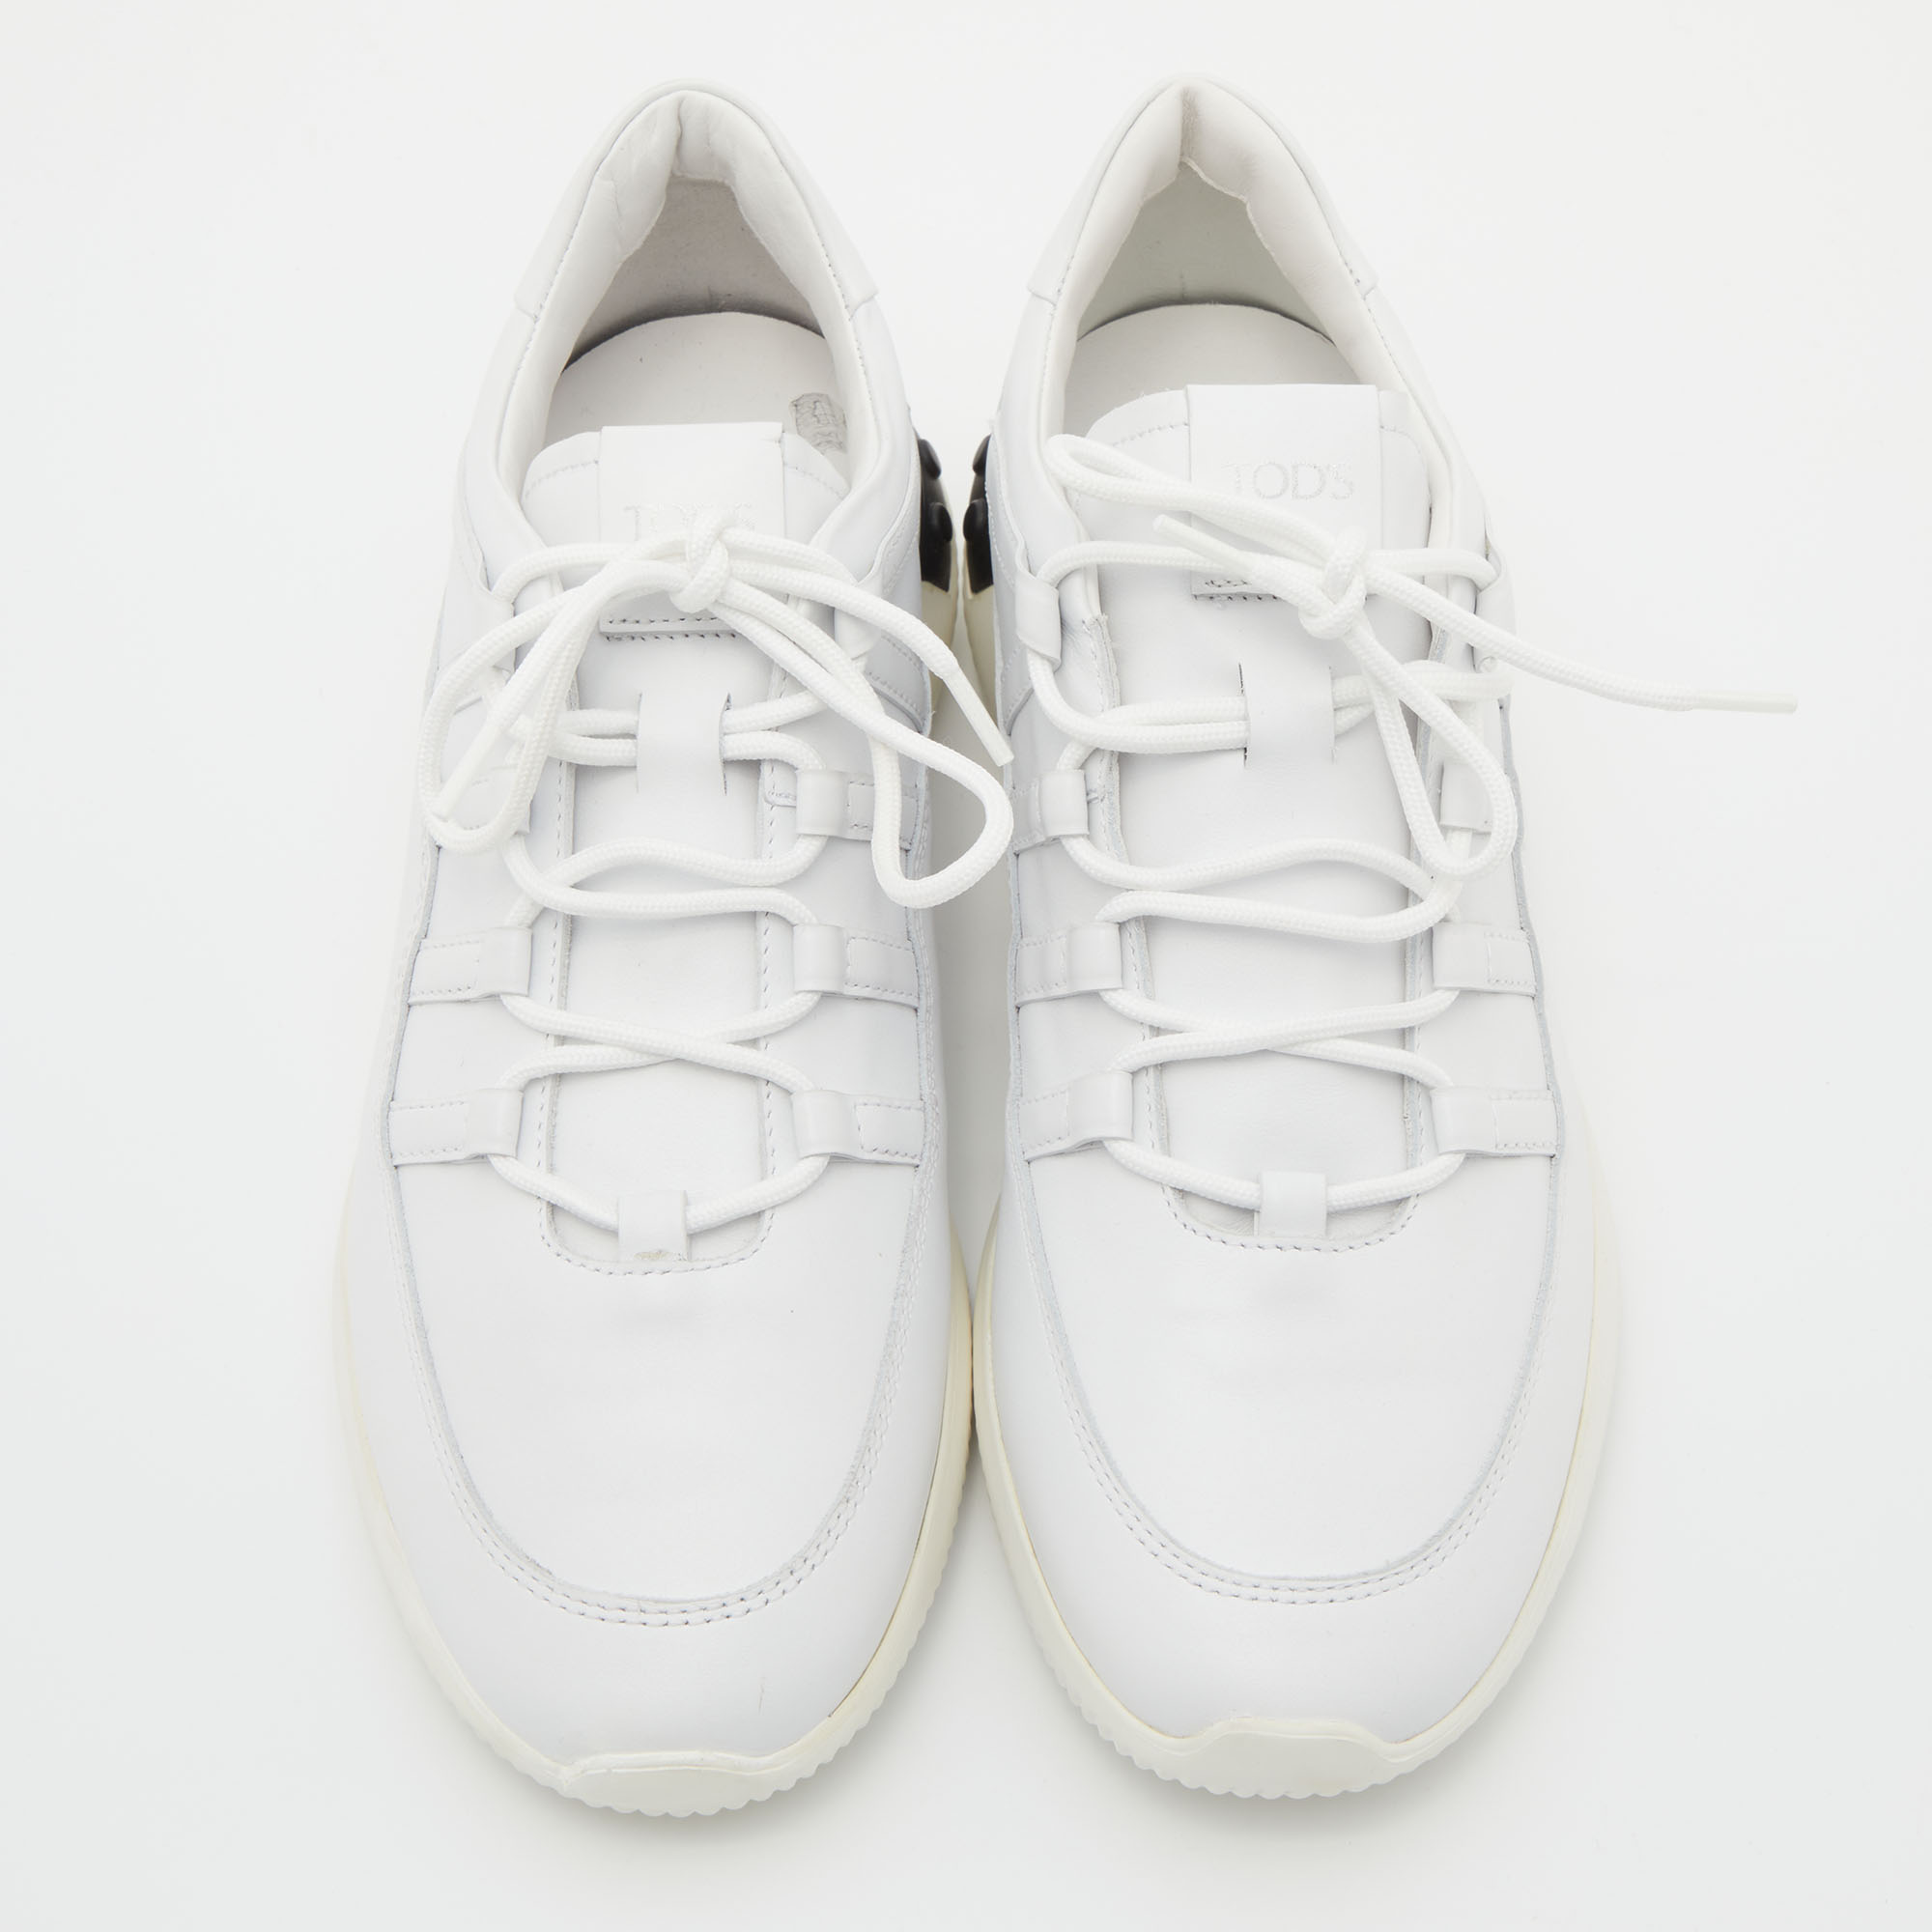 Tod's White Leather Low Top Sneakers Size 39.5